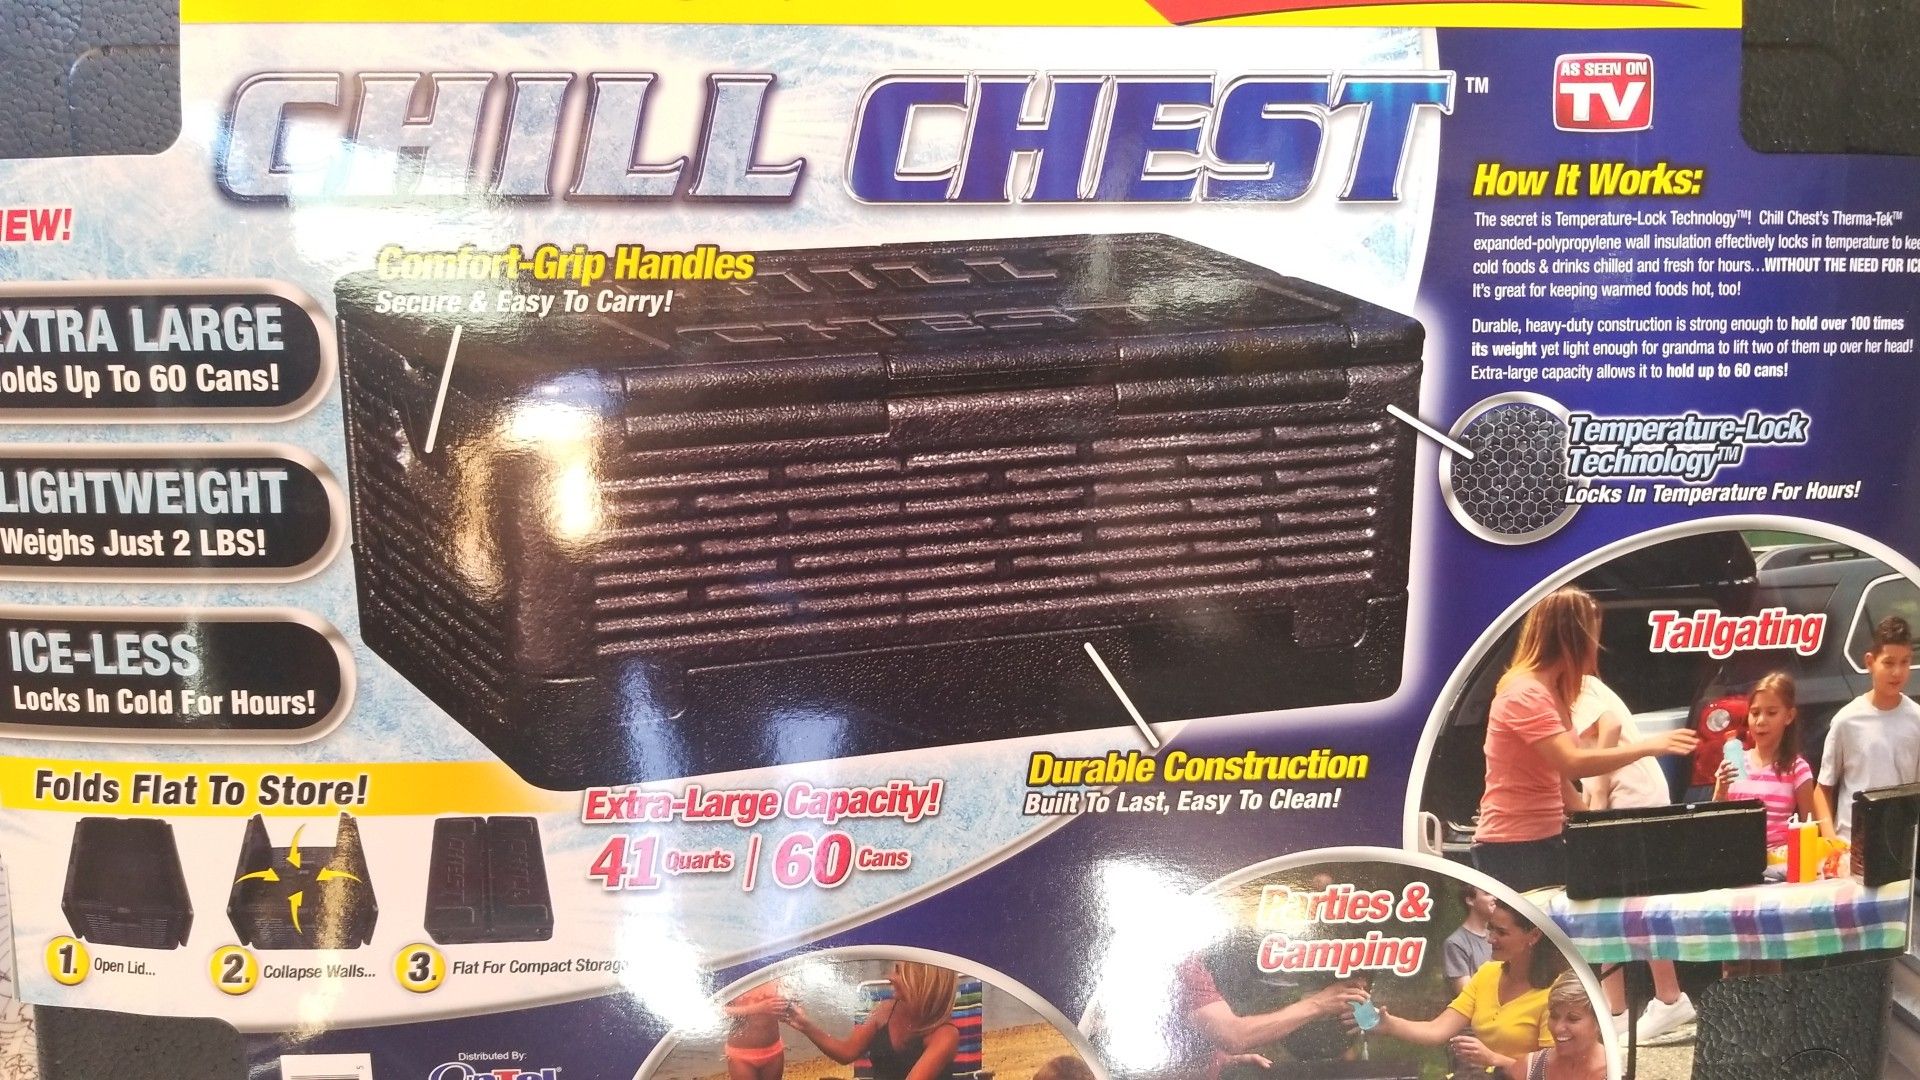 Chill Chest Ice less cooler